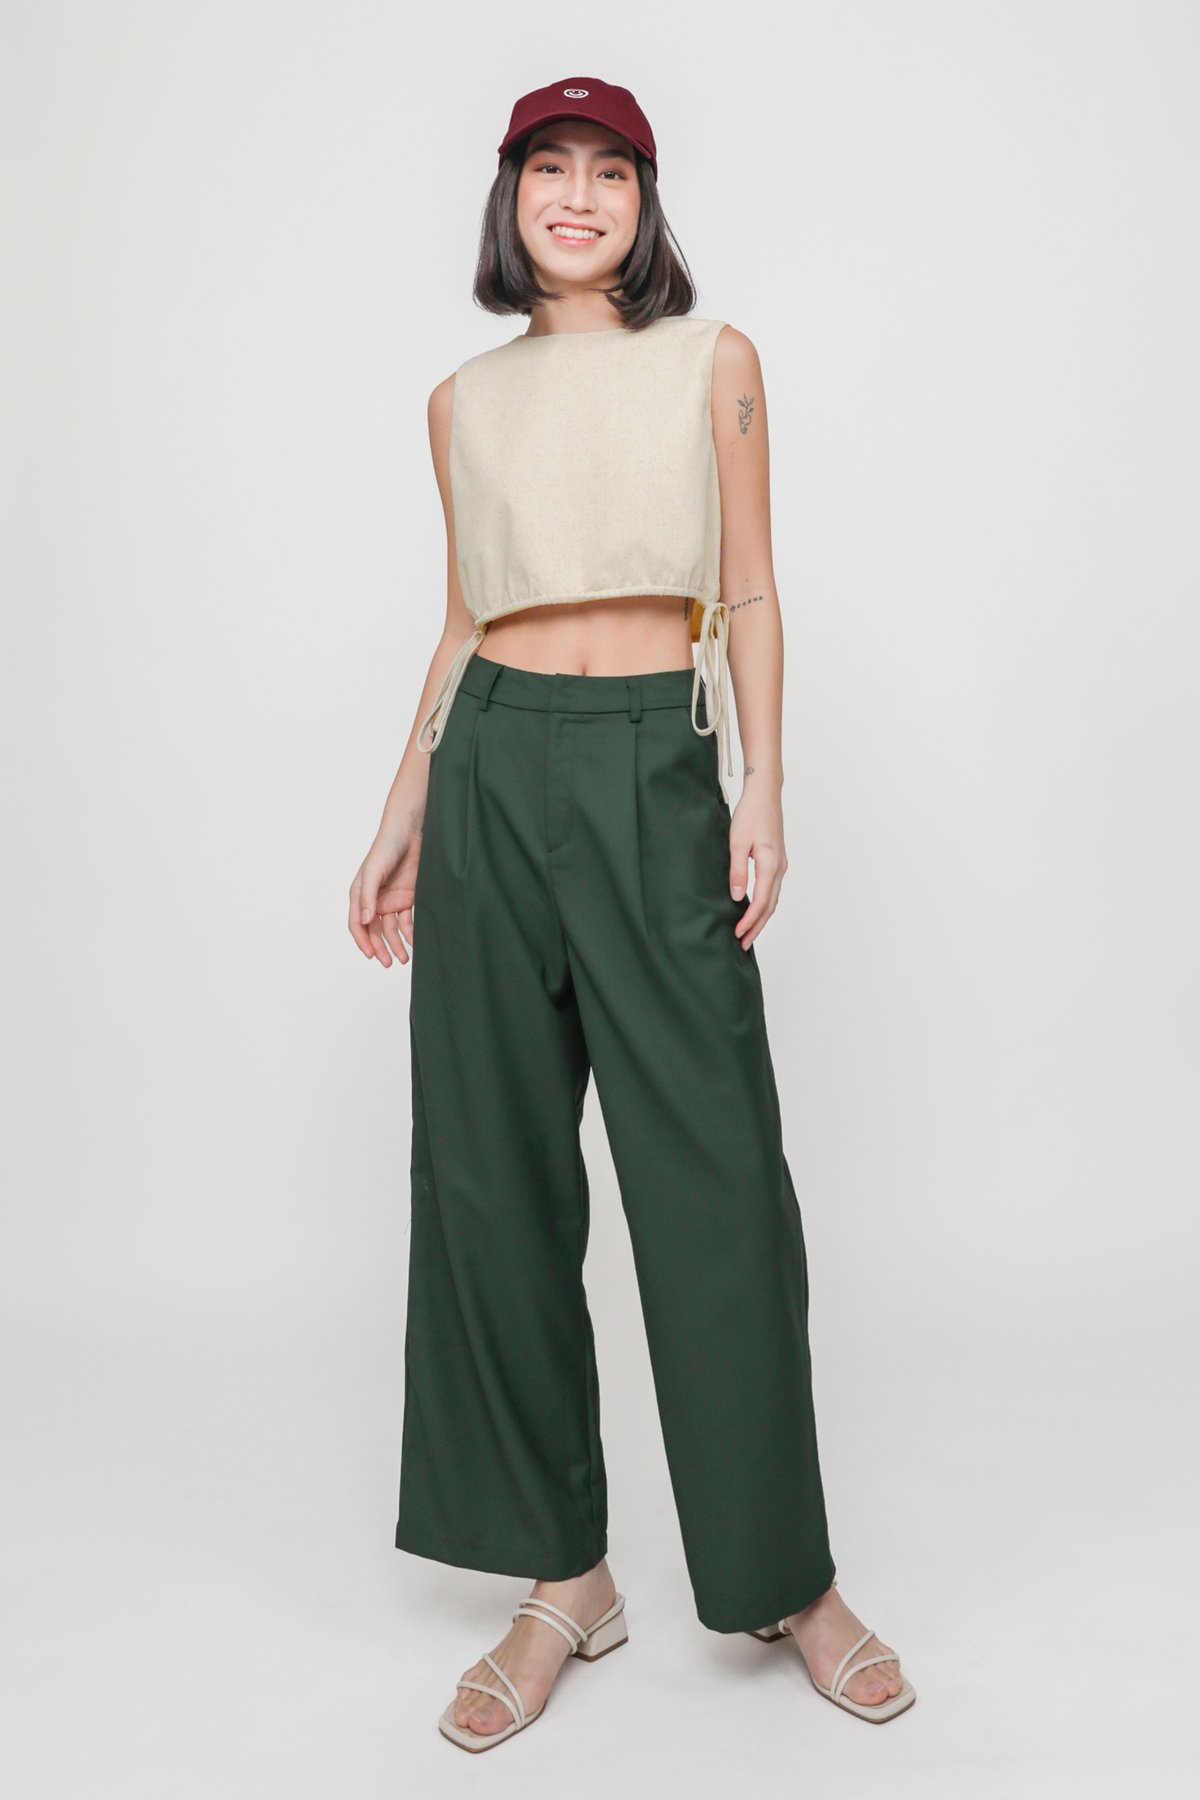 Raegan Hooked Front Pants (Forest)